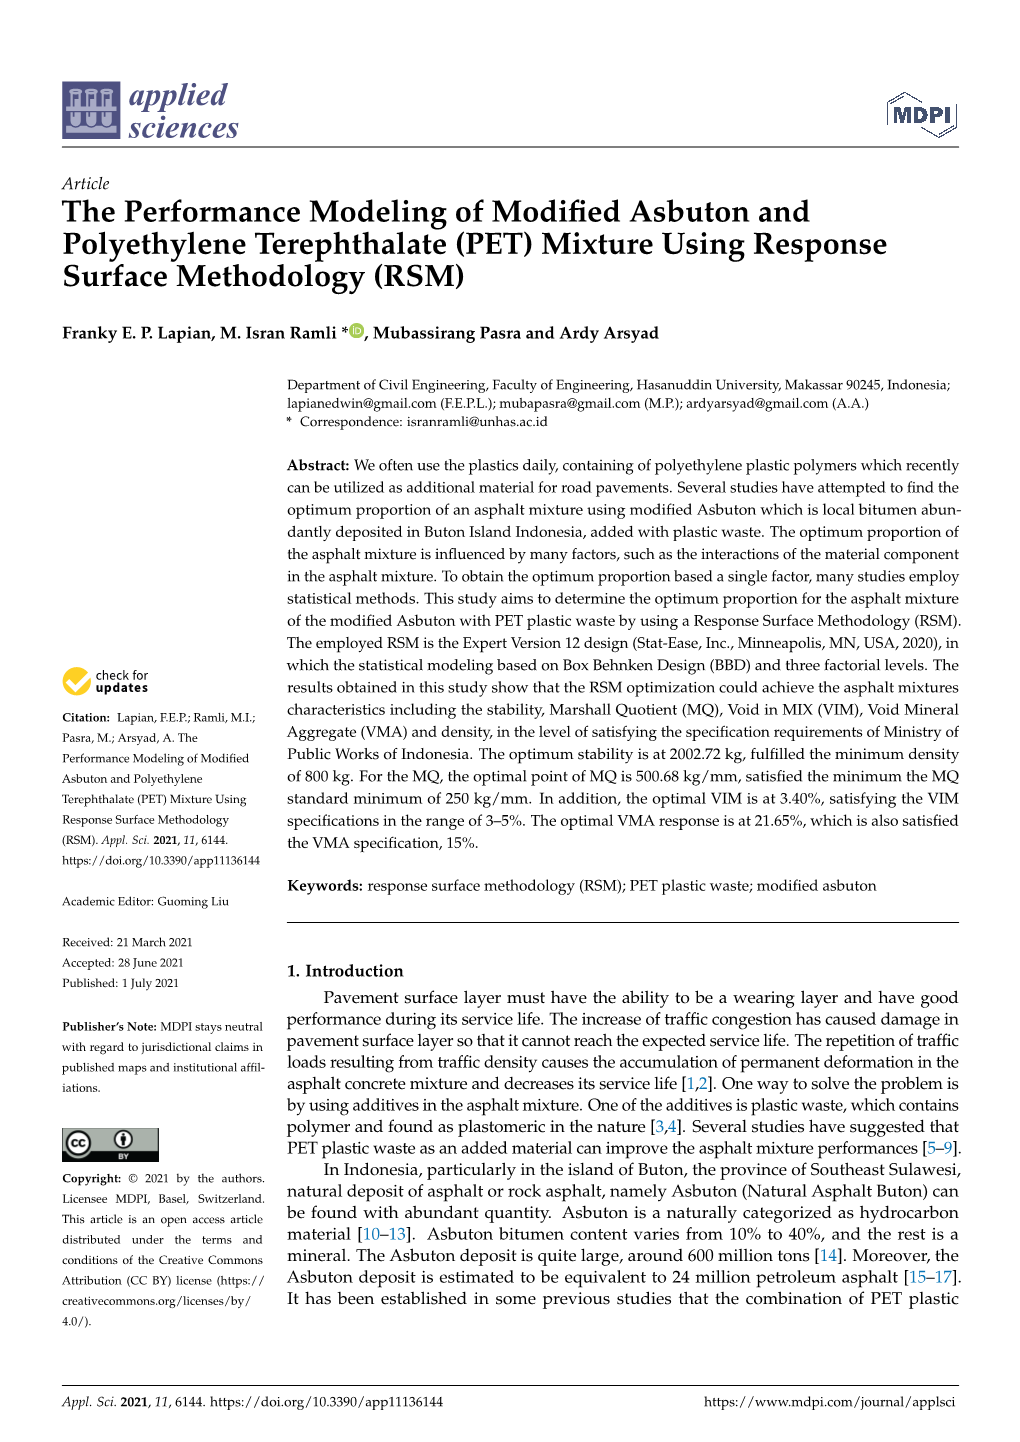 The Performance Modeling of Modified Asbuton and Polyethylene